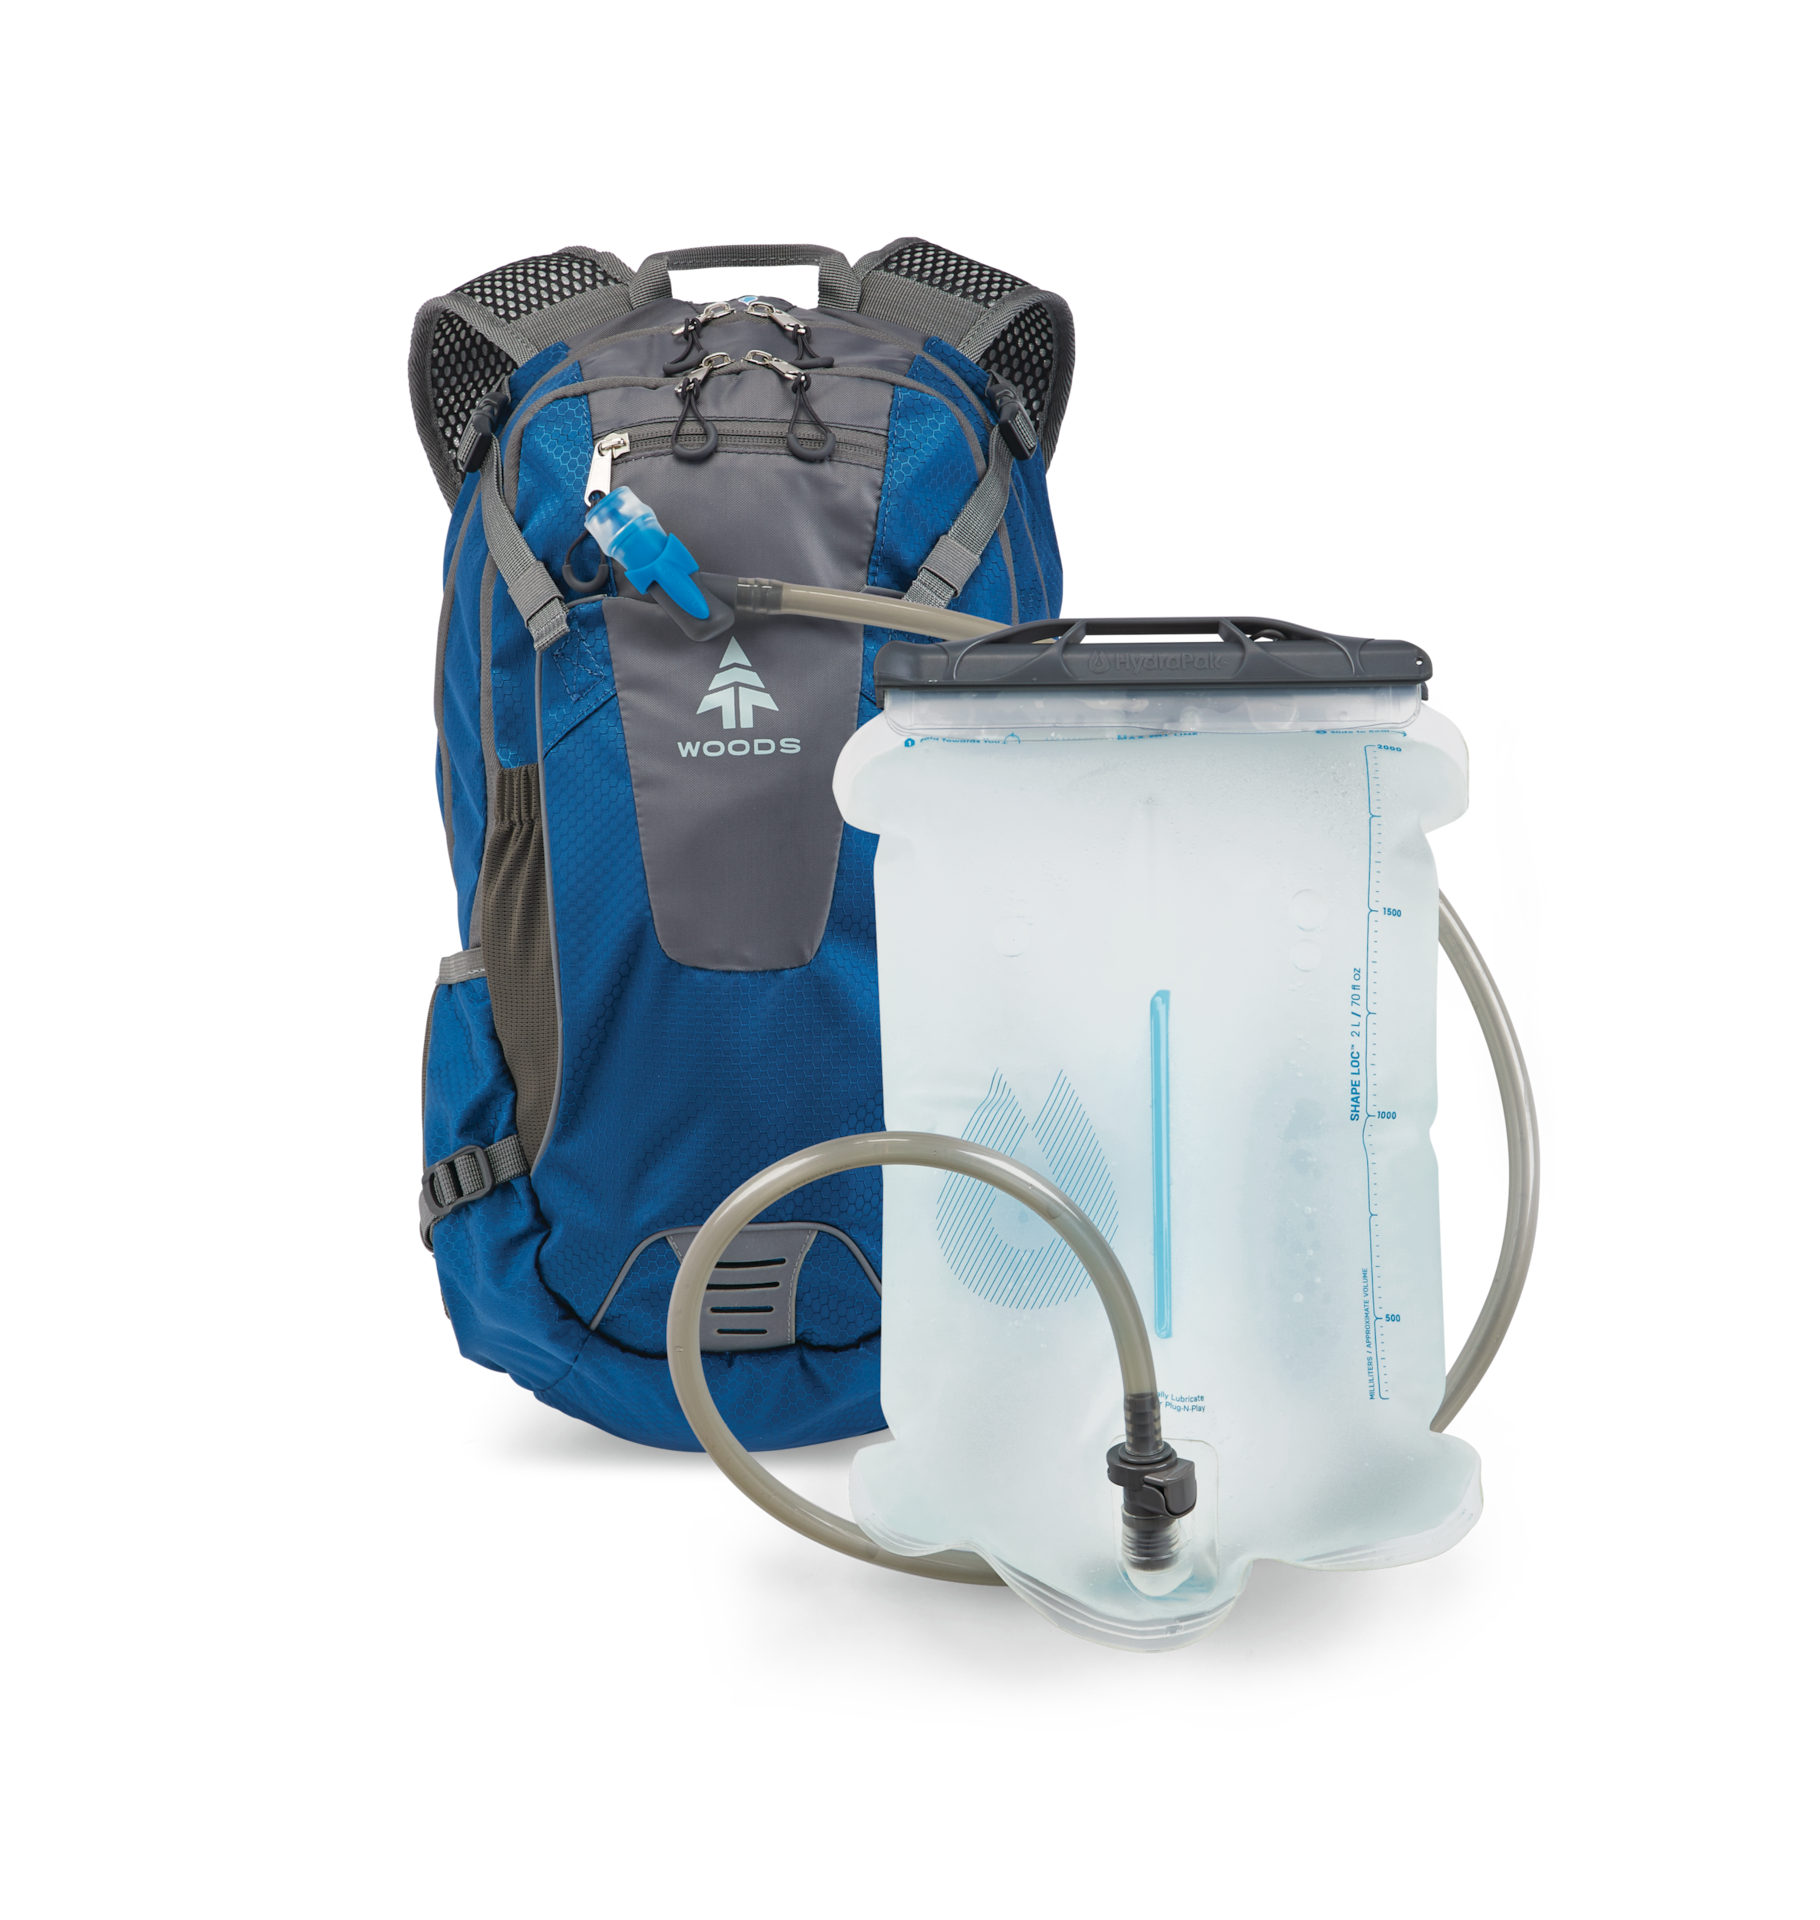 https://media-www.canadiantire.ca/product/playing/camping/camping-accessories/0763604/woods-hydration-pack-abf30cfc-b03b-4486-b4b6-f4649a301ec4.png